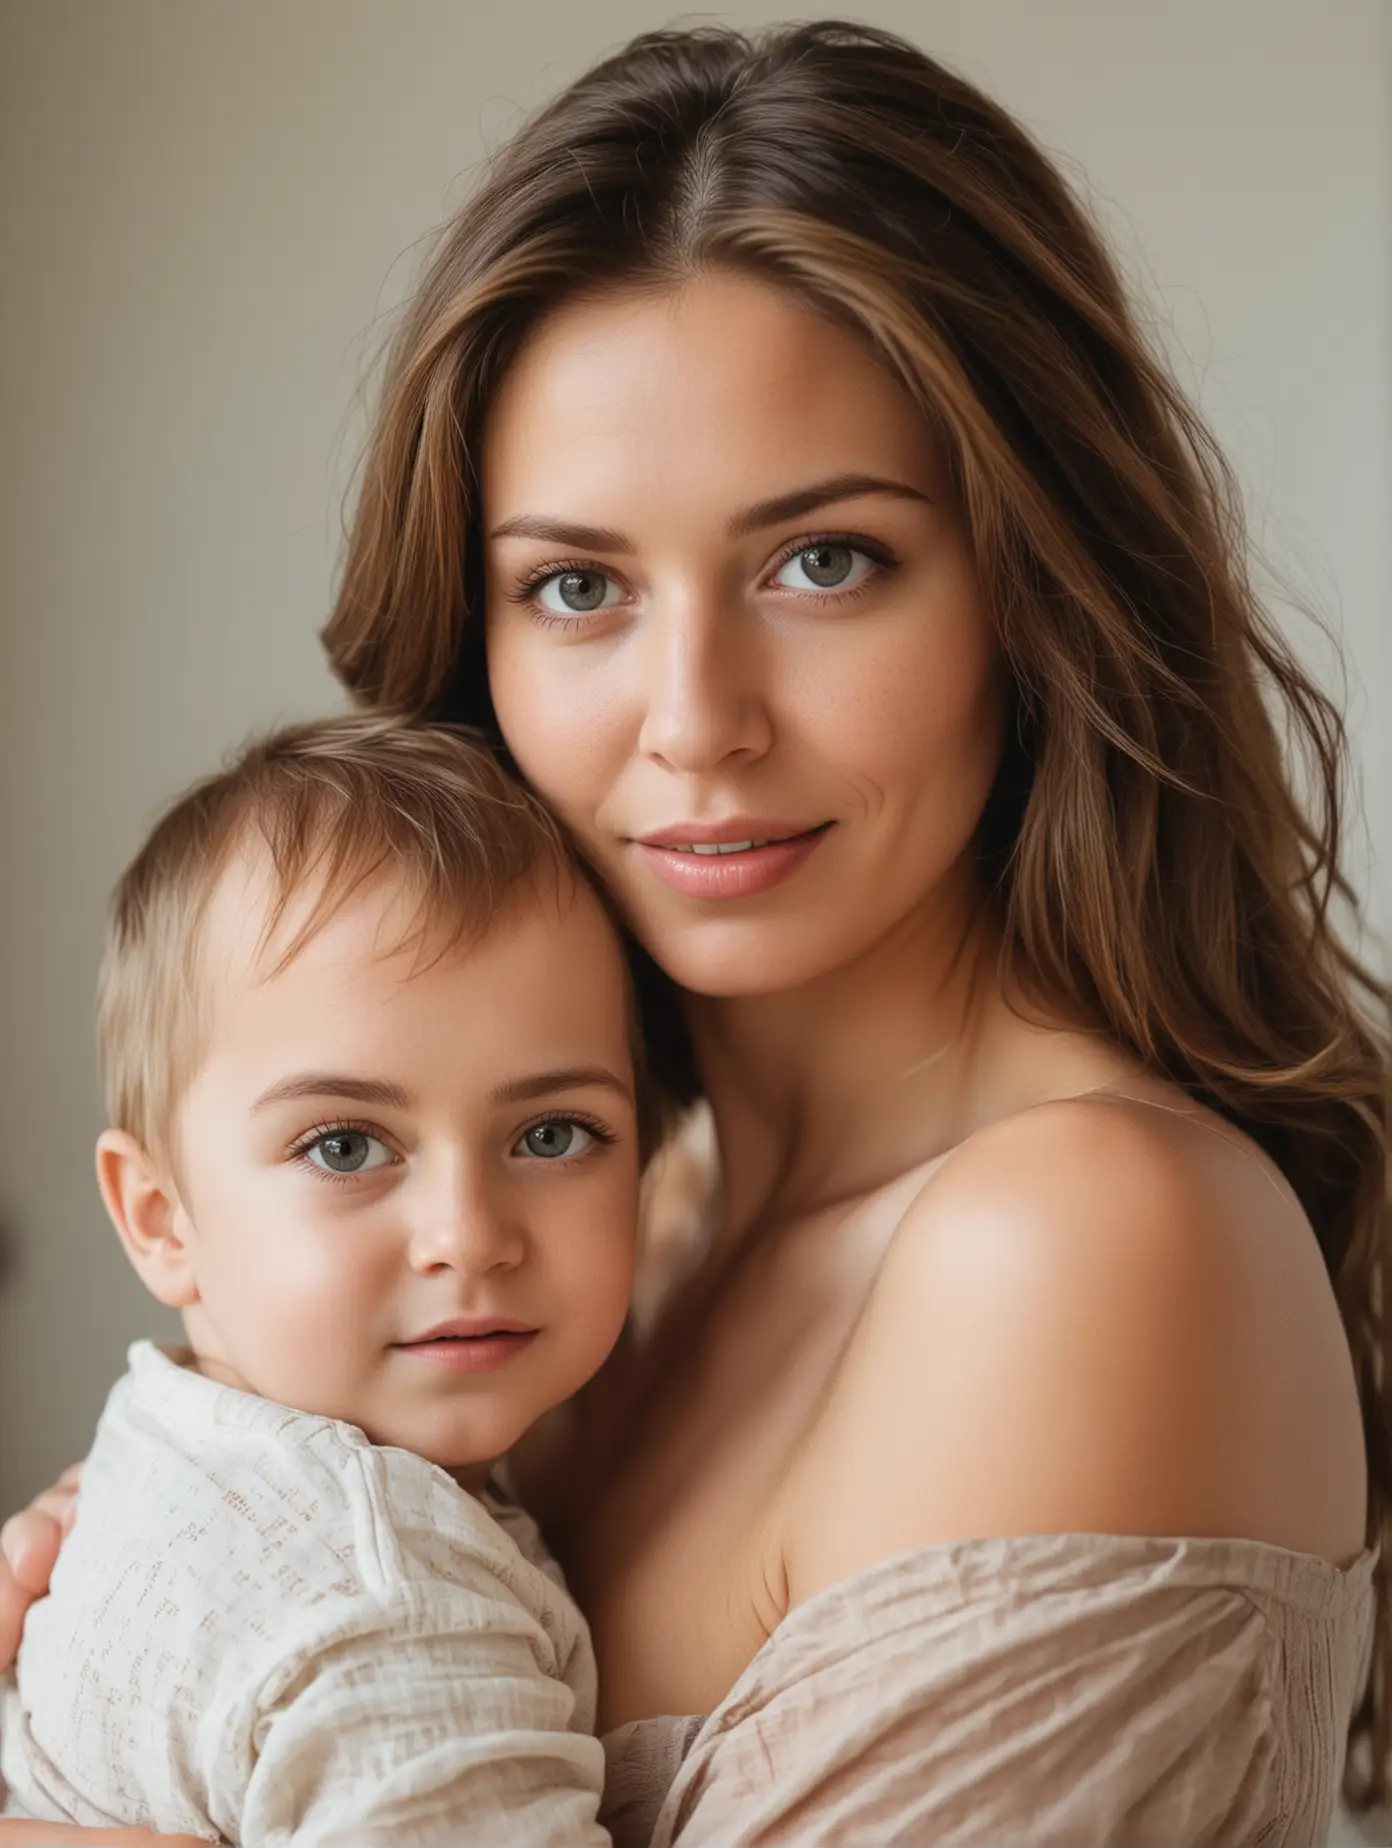 A beautiful woman faces the camera and holds a child